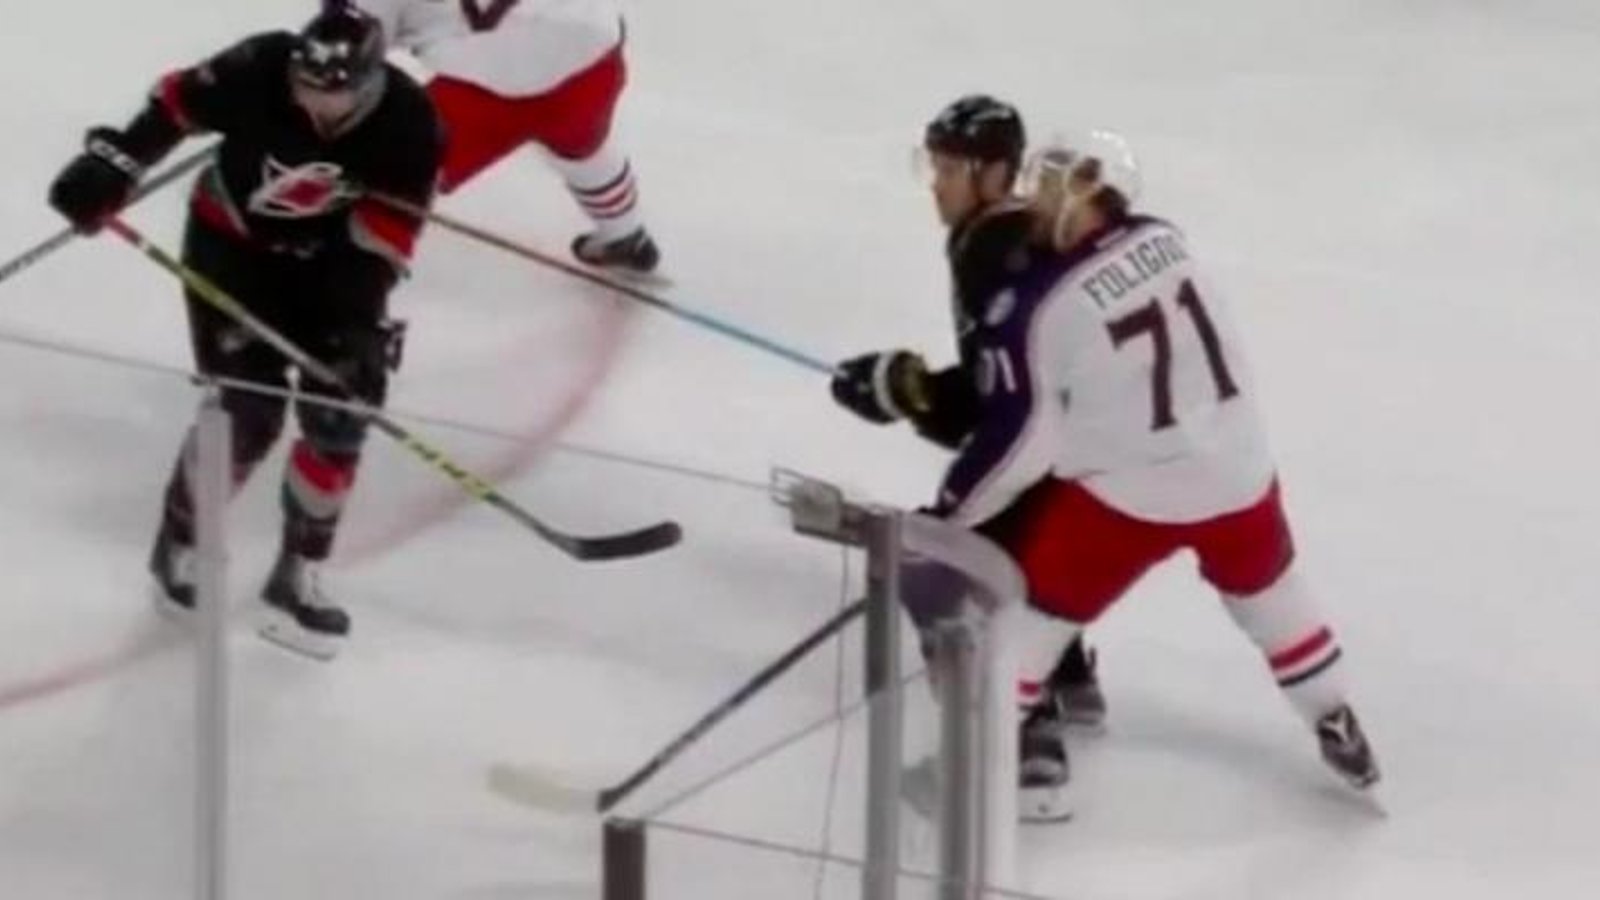 Malone will not be suspended after dangerous hit on Foligno.